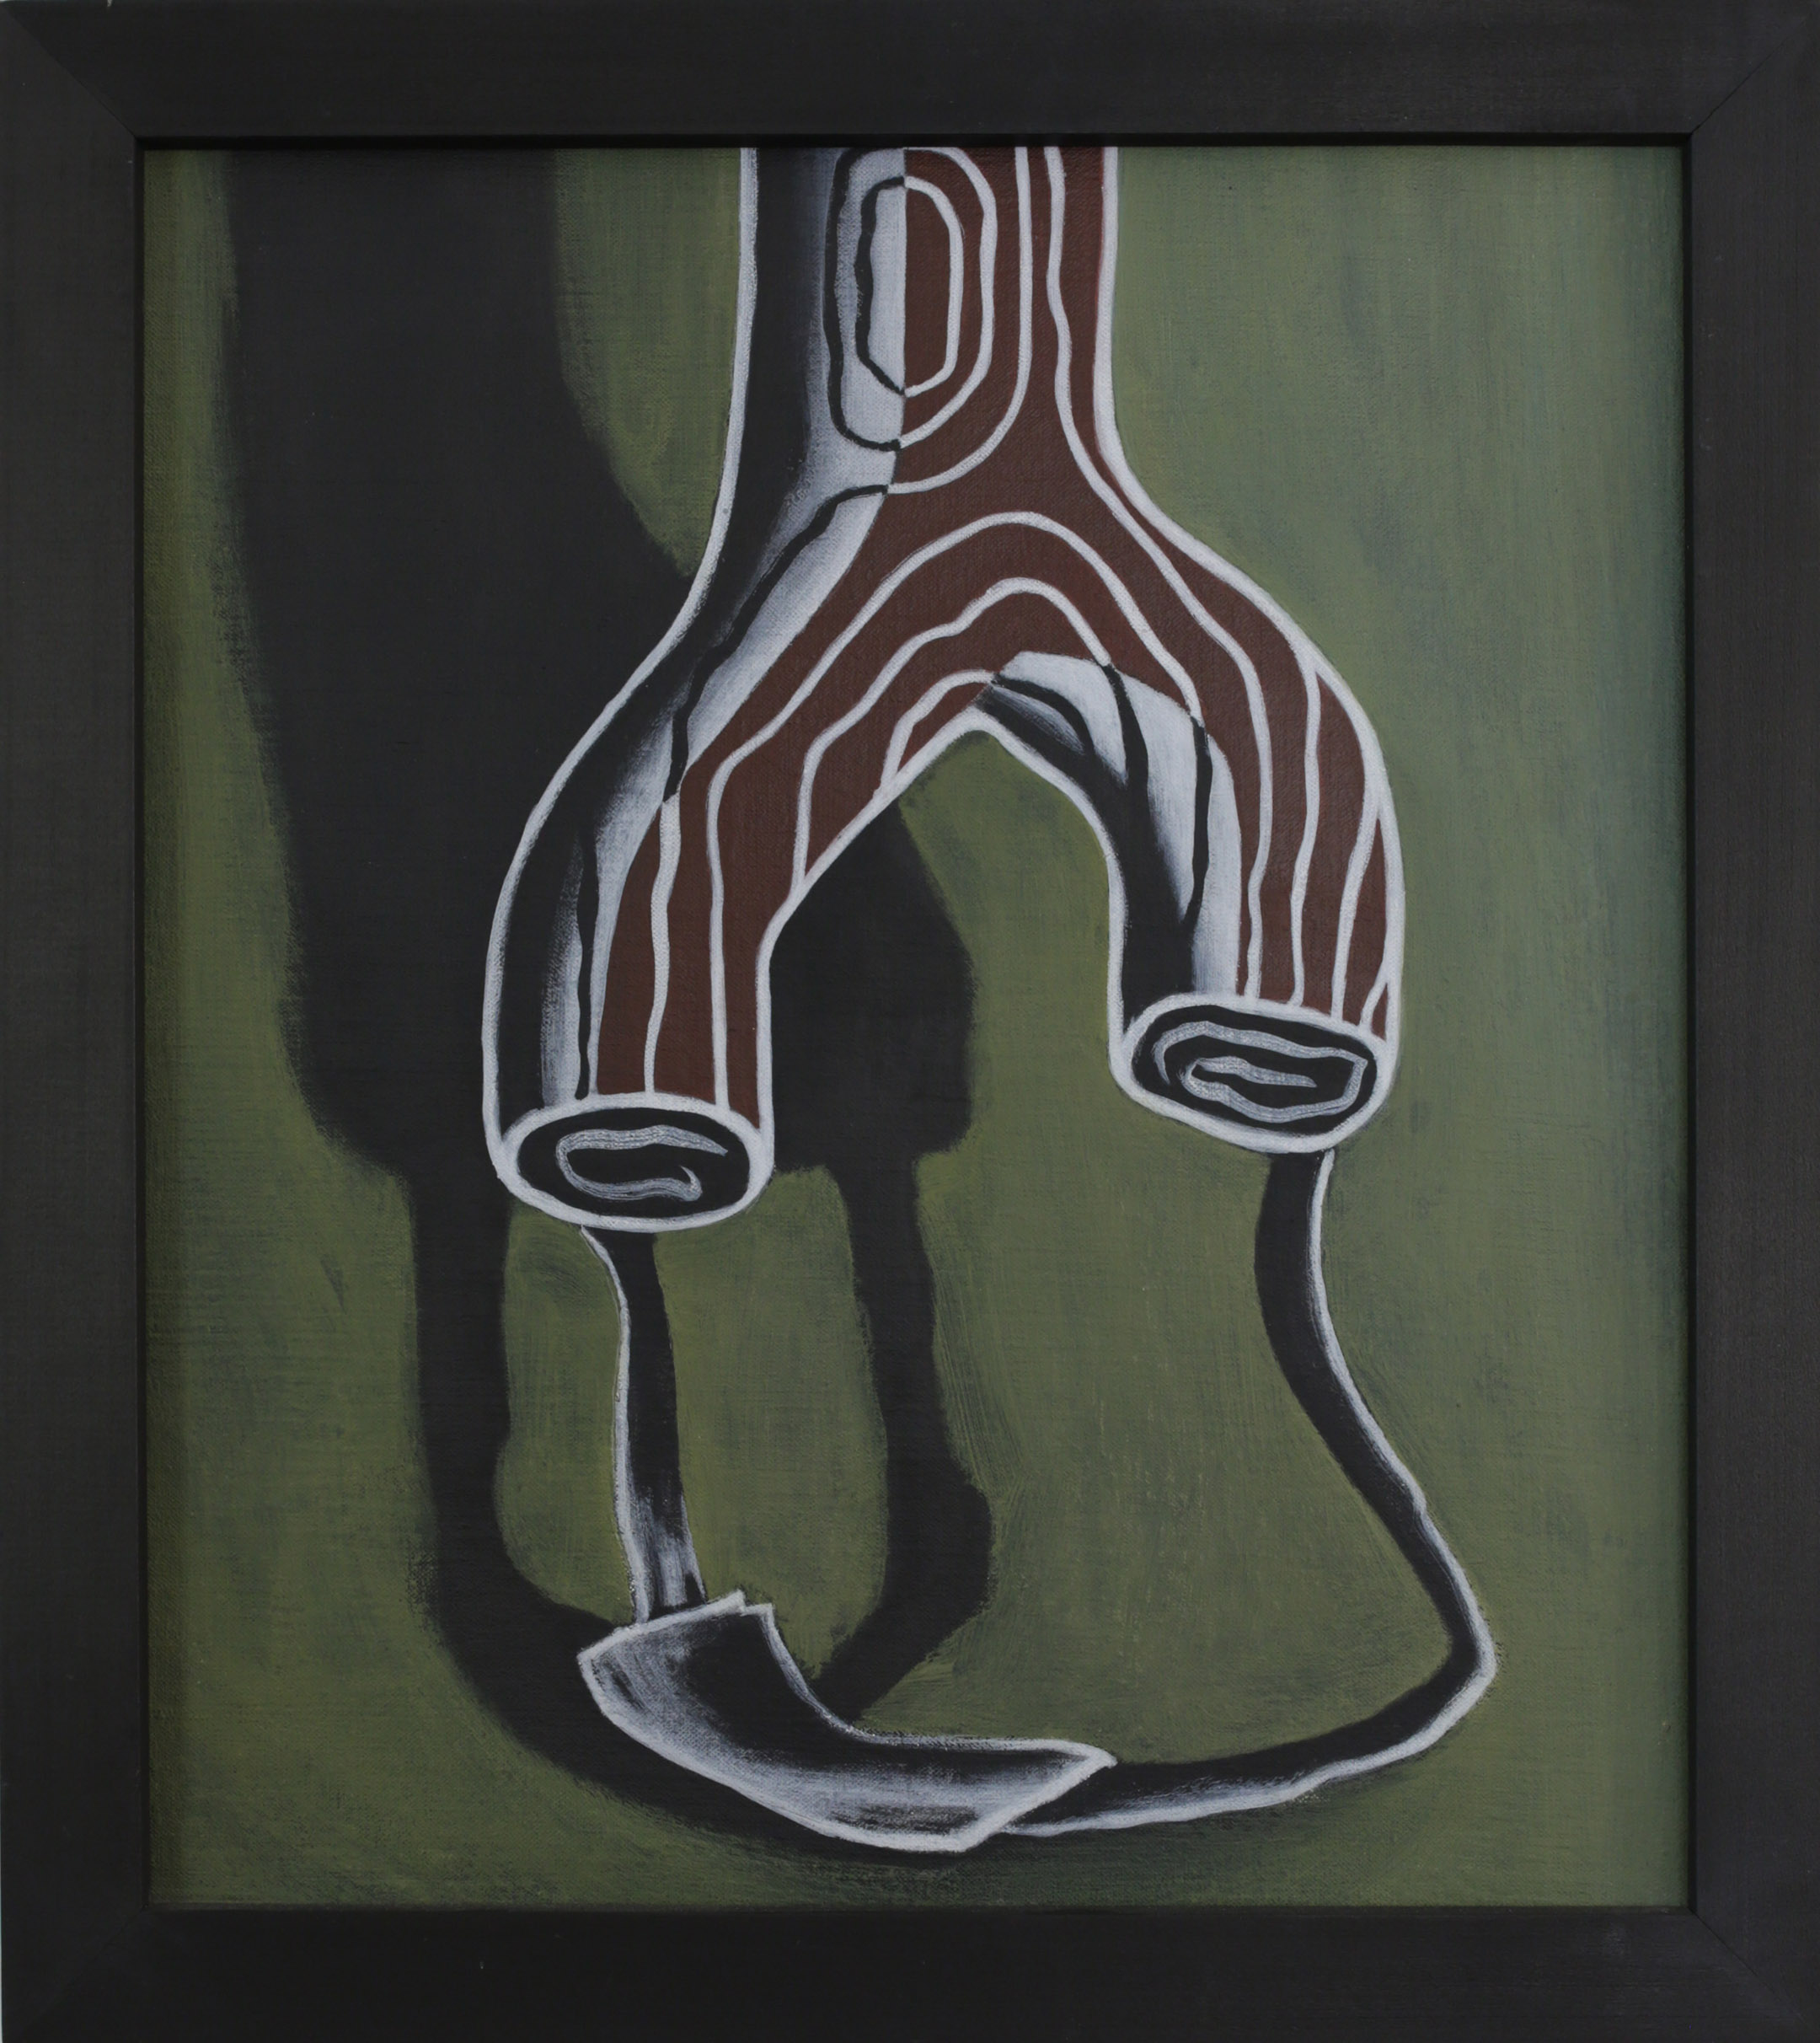    Coward,  &nbsp;1991 Pigment, acrylic polymer, and gesso on linen-mounted panel 